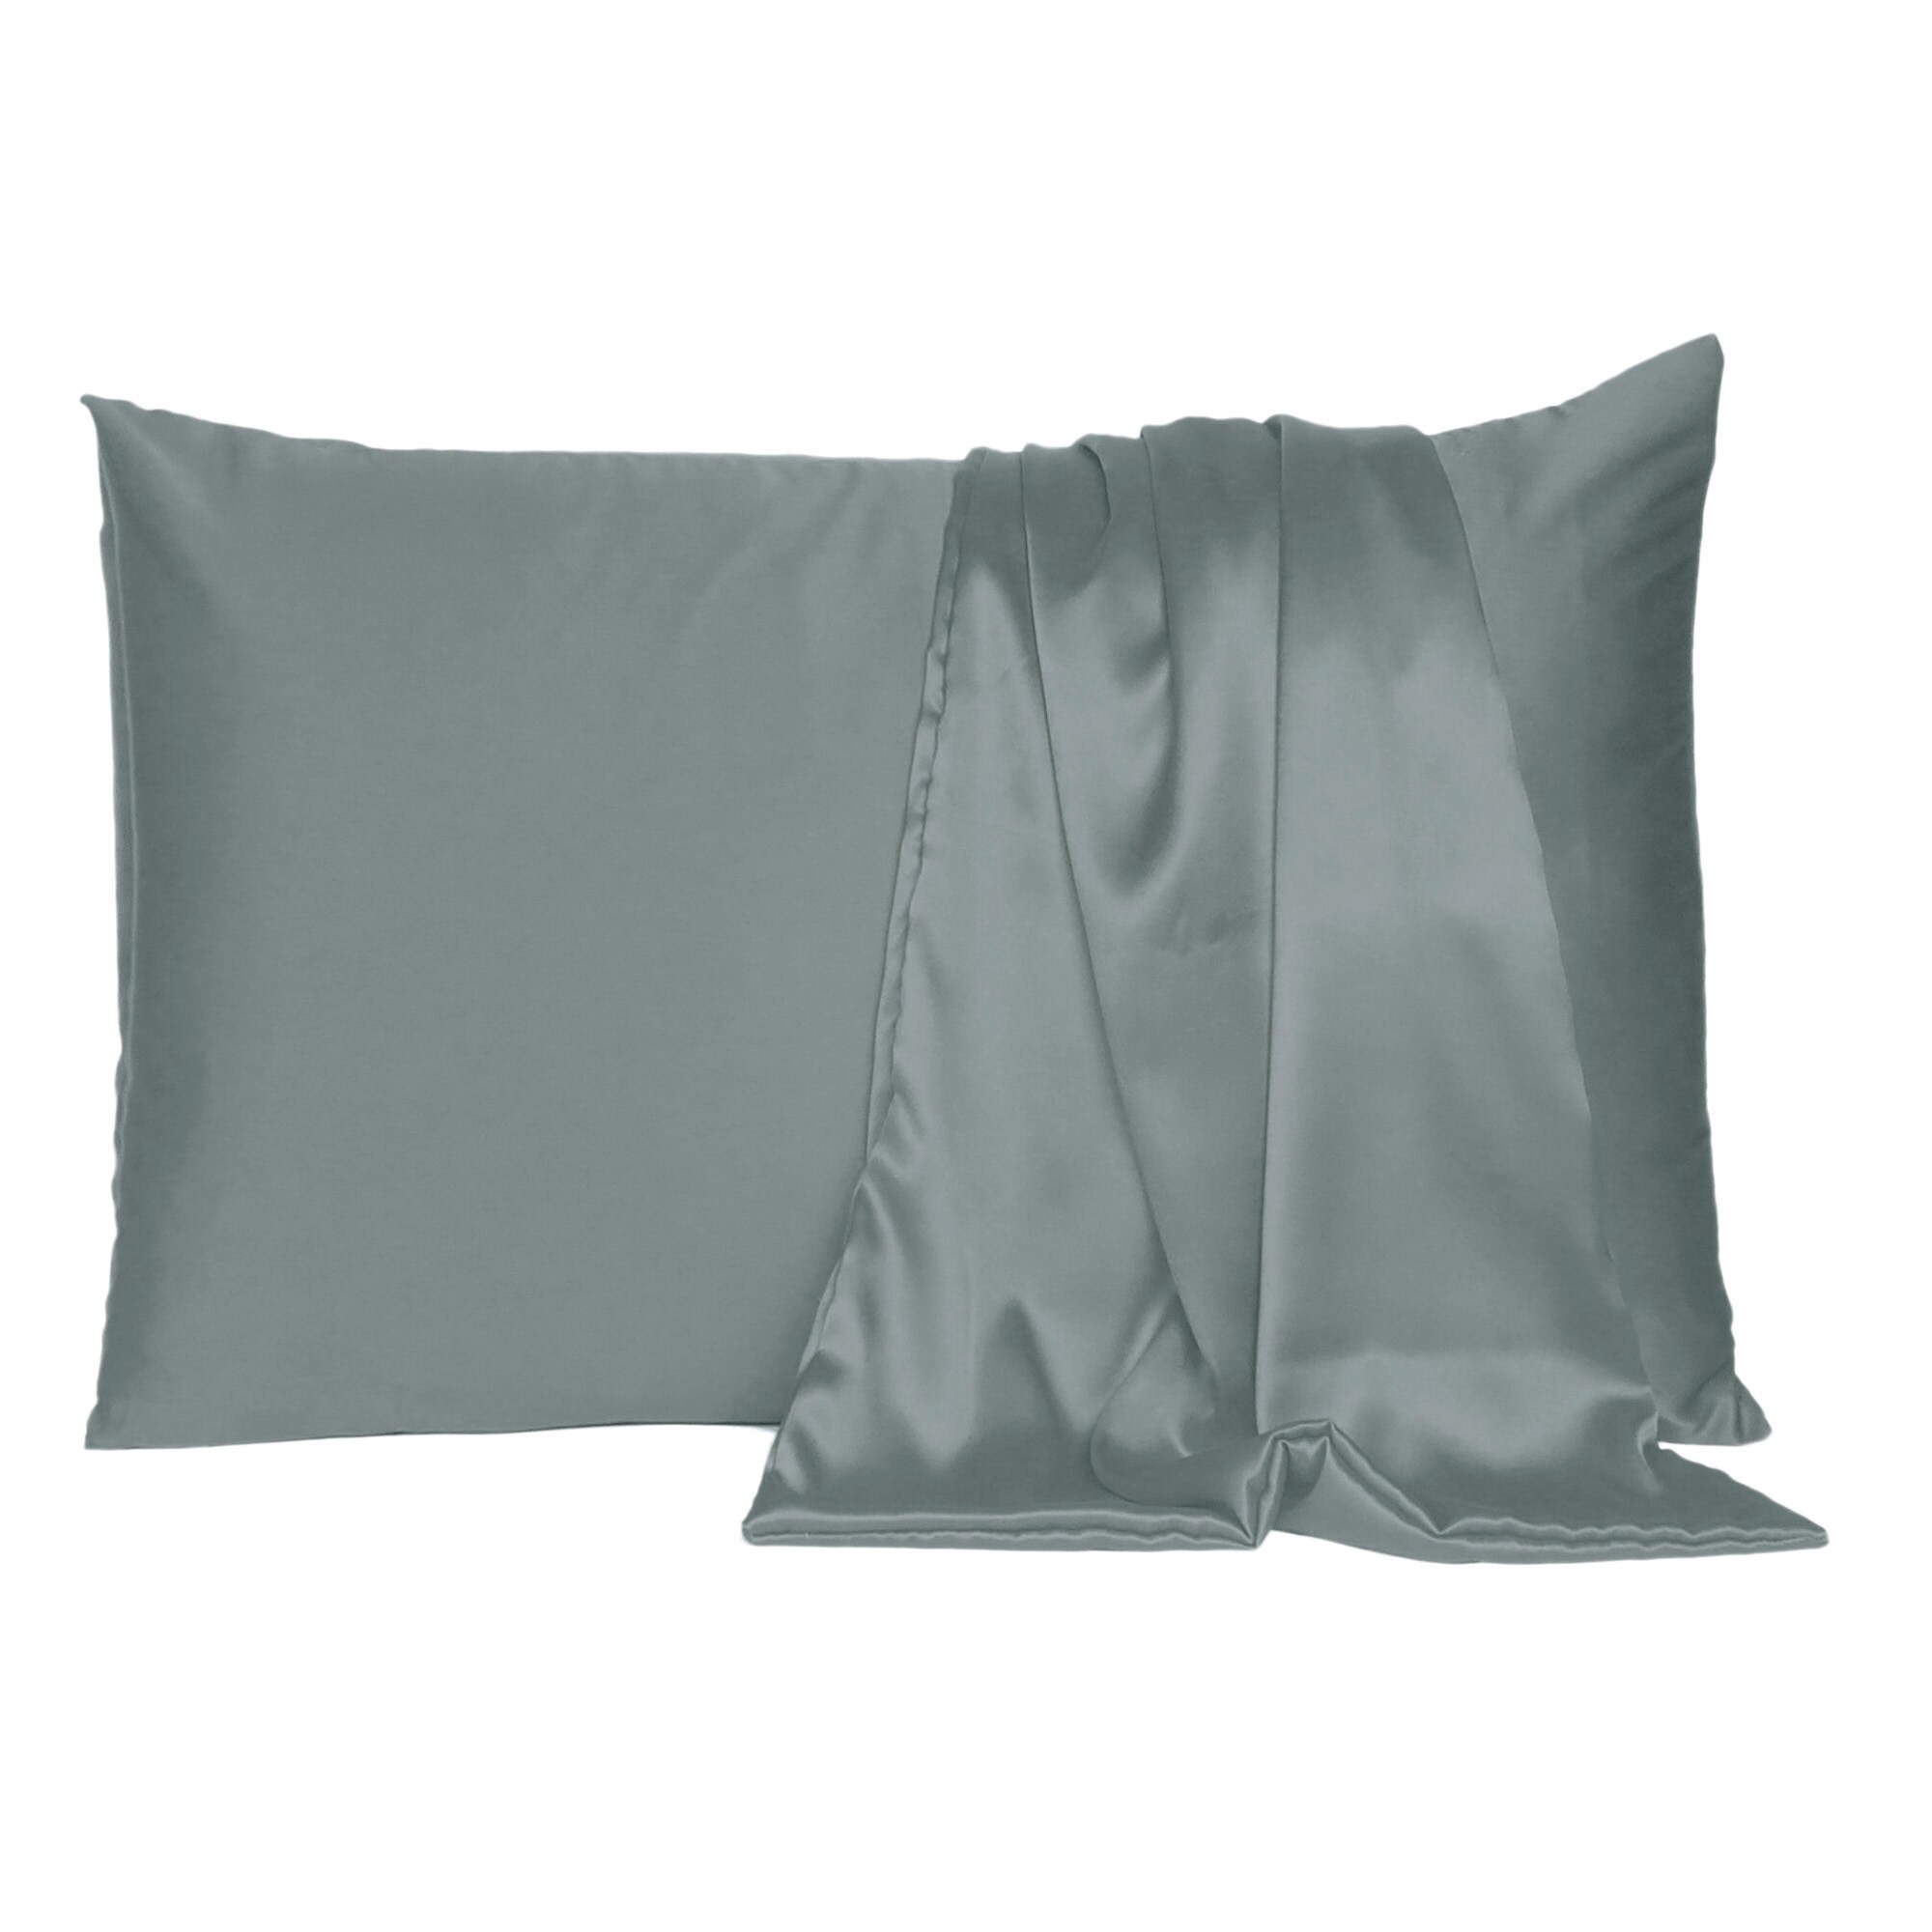 BEIGE COLOR 1 PAIR TWO SOFT "SILK" SATIN / SATEEN PILLOW CASE / COVER 